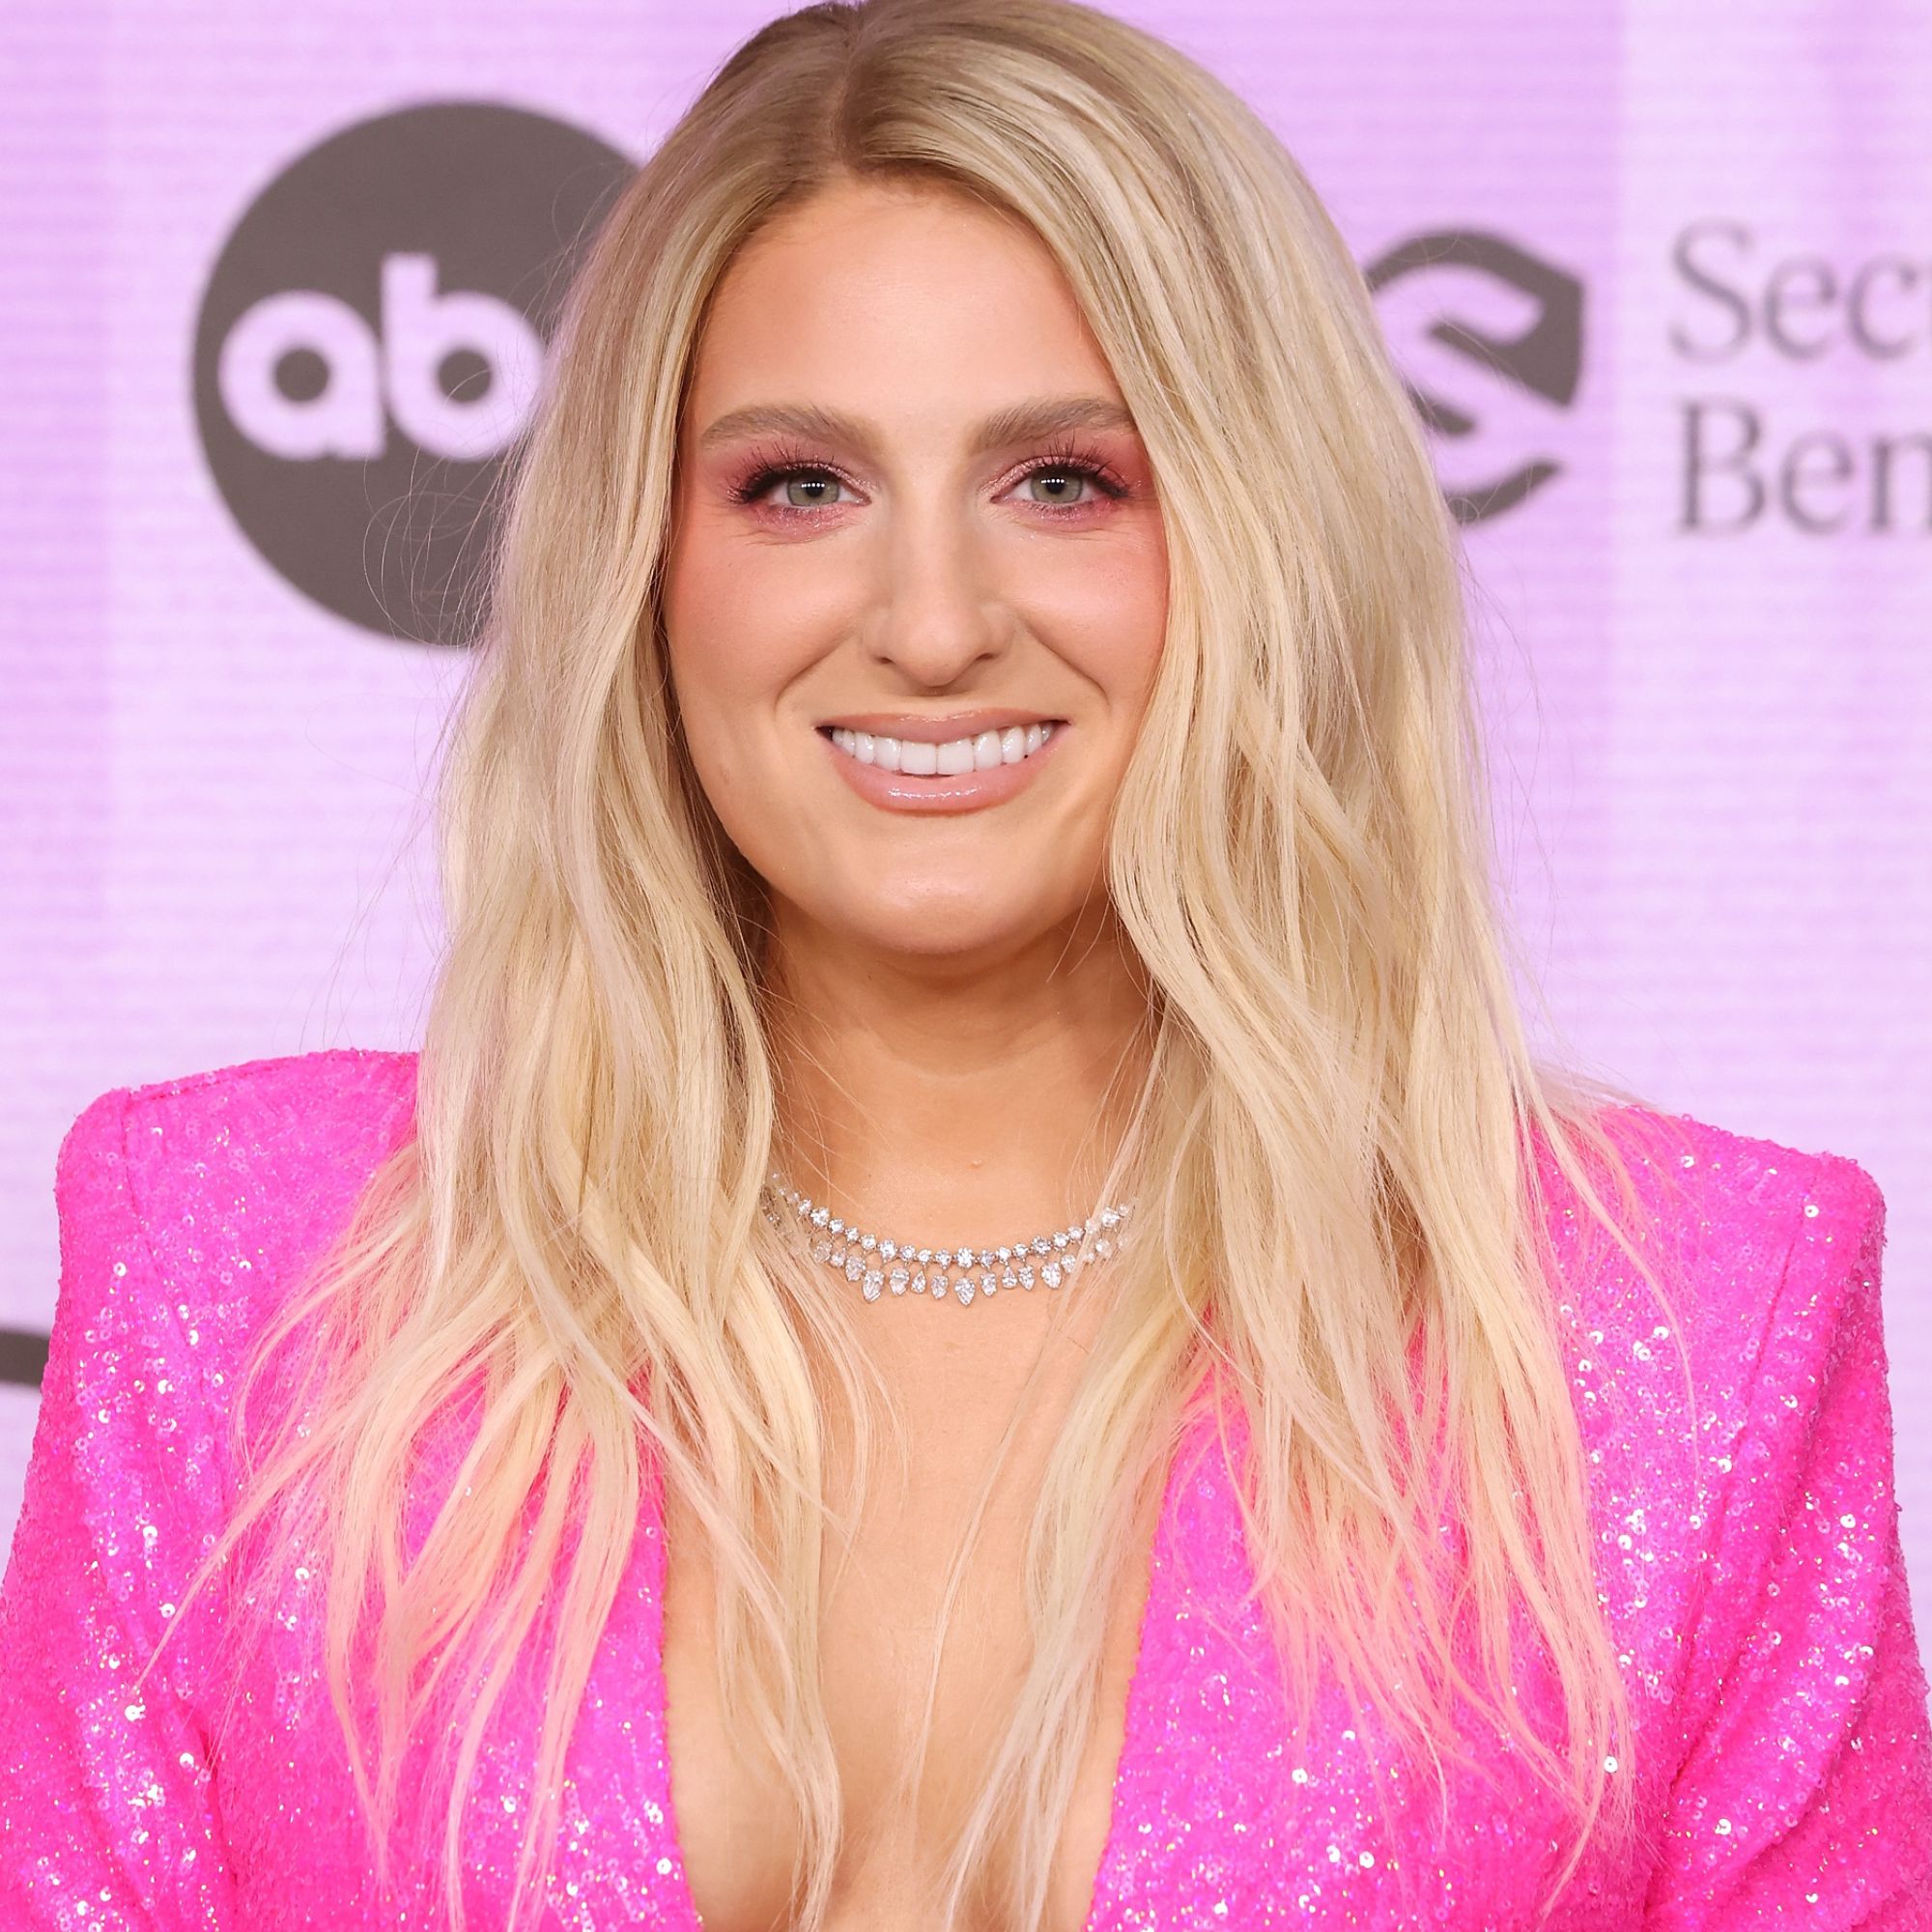 Who Is Meghan Trainor? Get To Know the "Made You Look" Singer